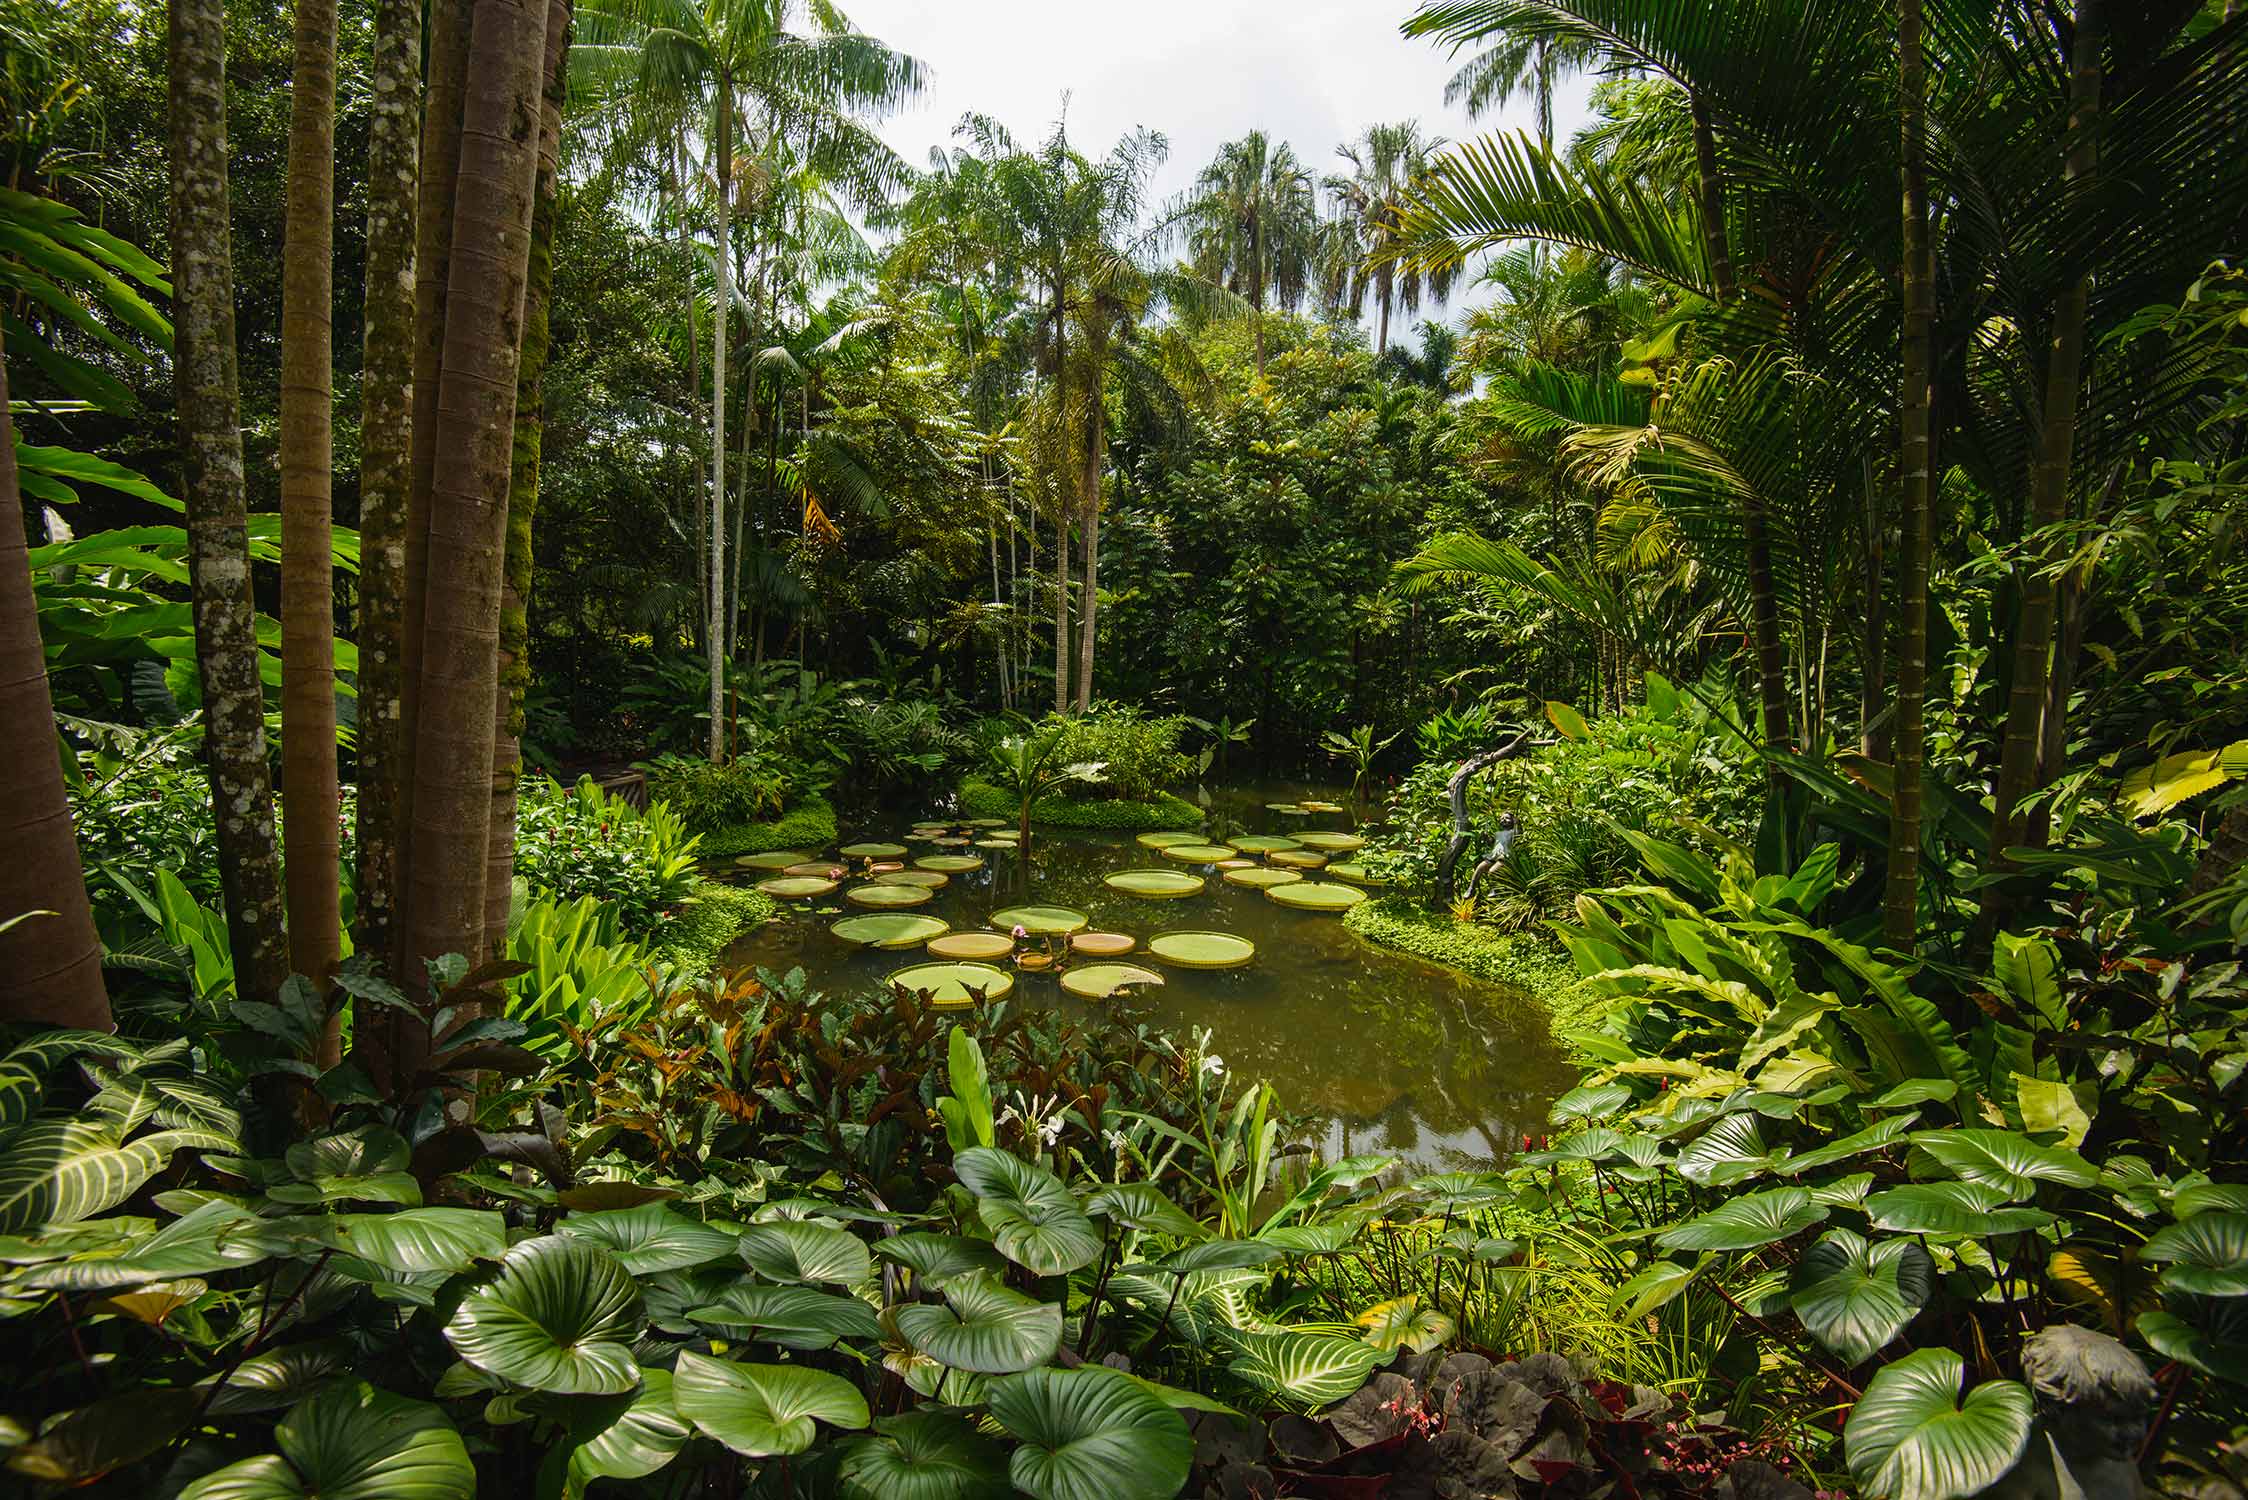 Pond surrounded by forest